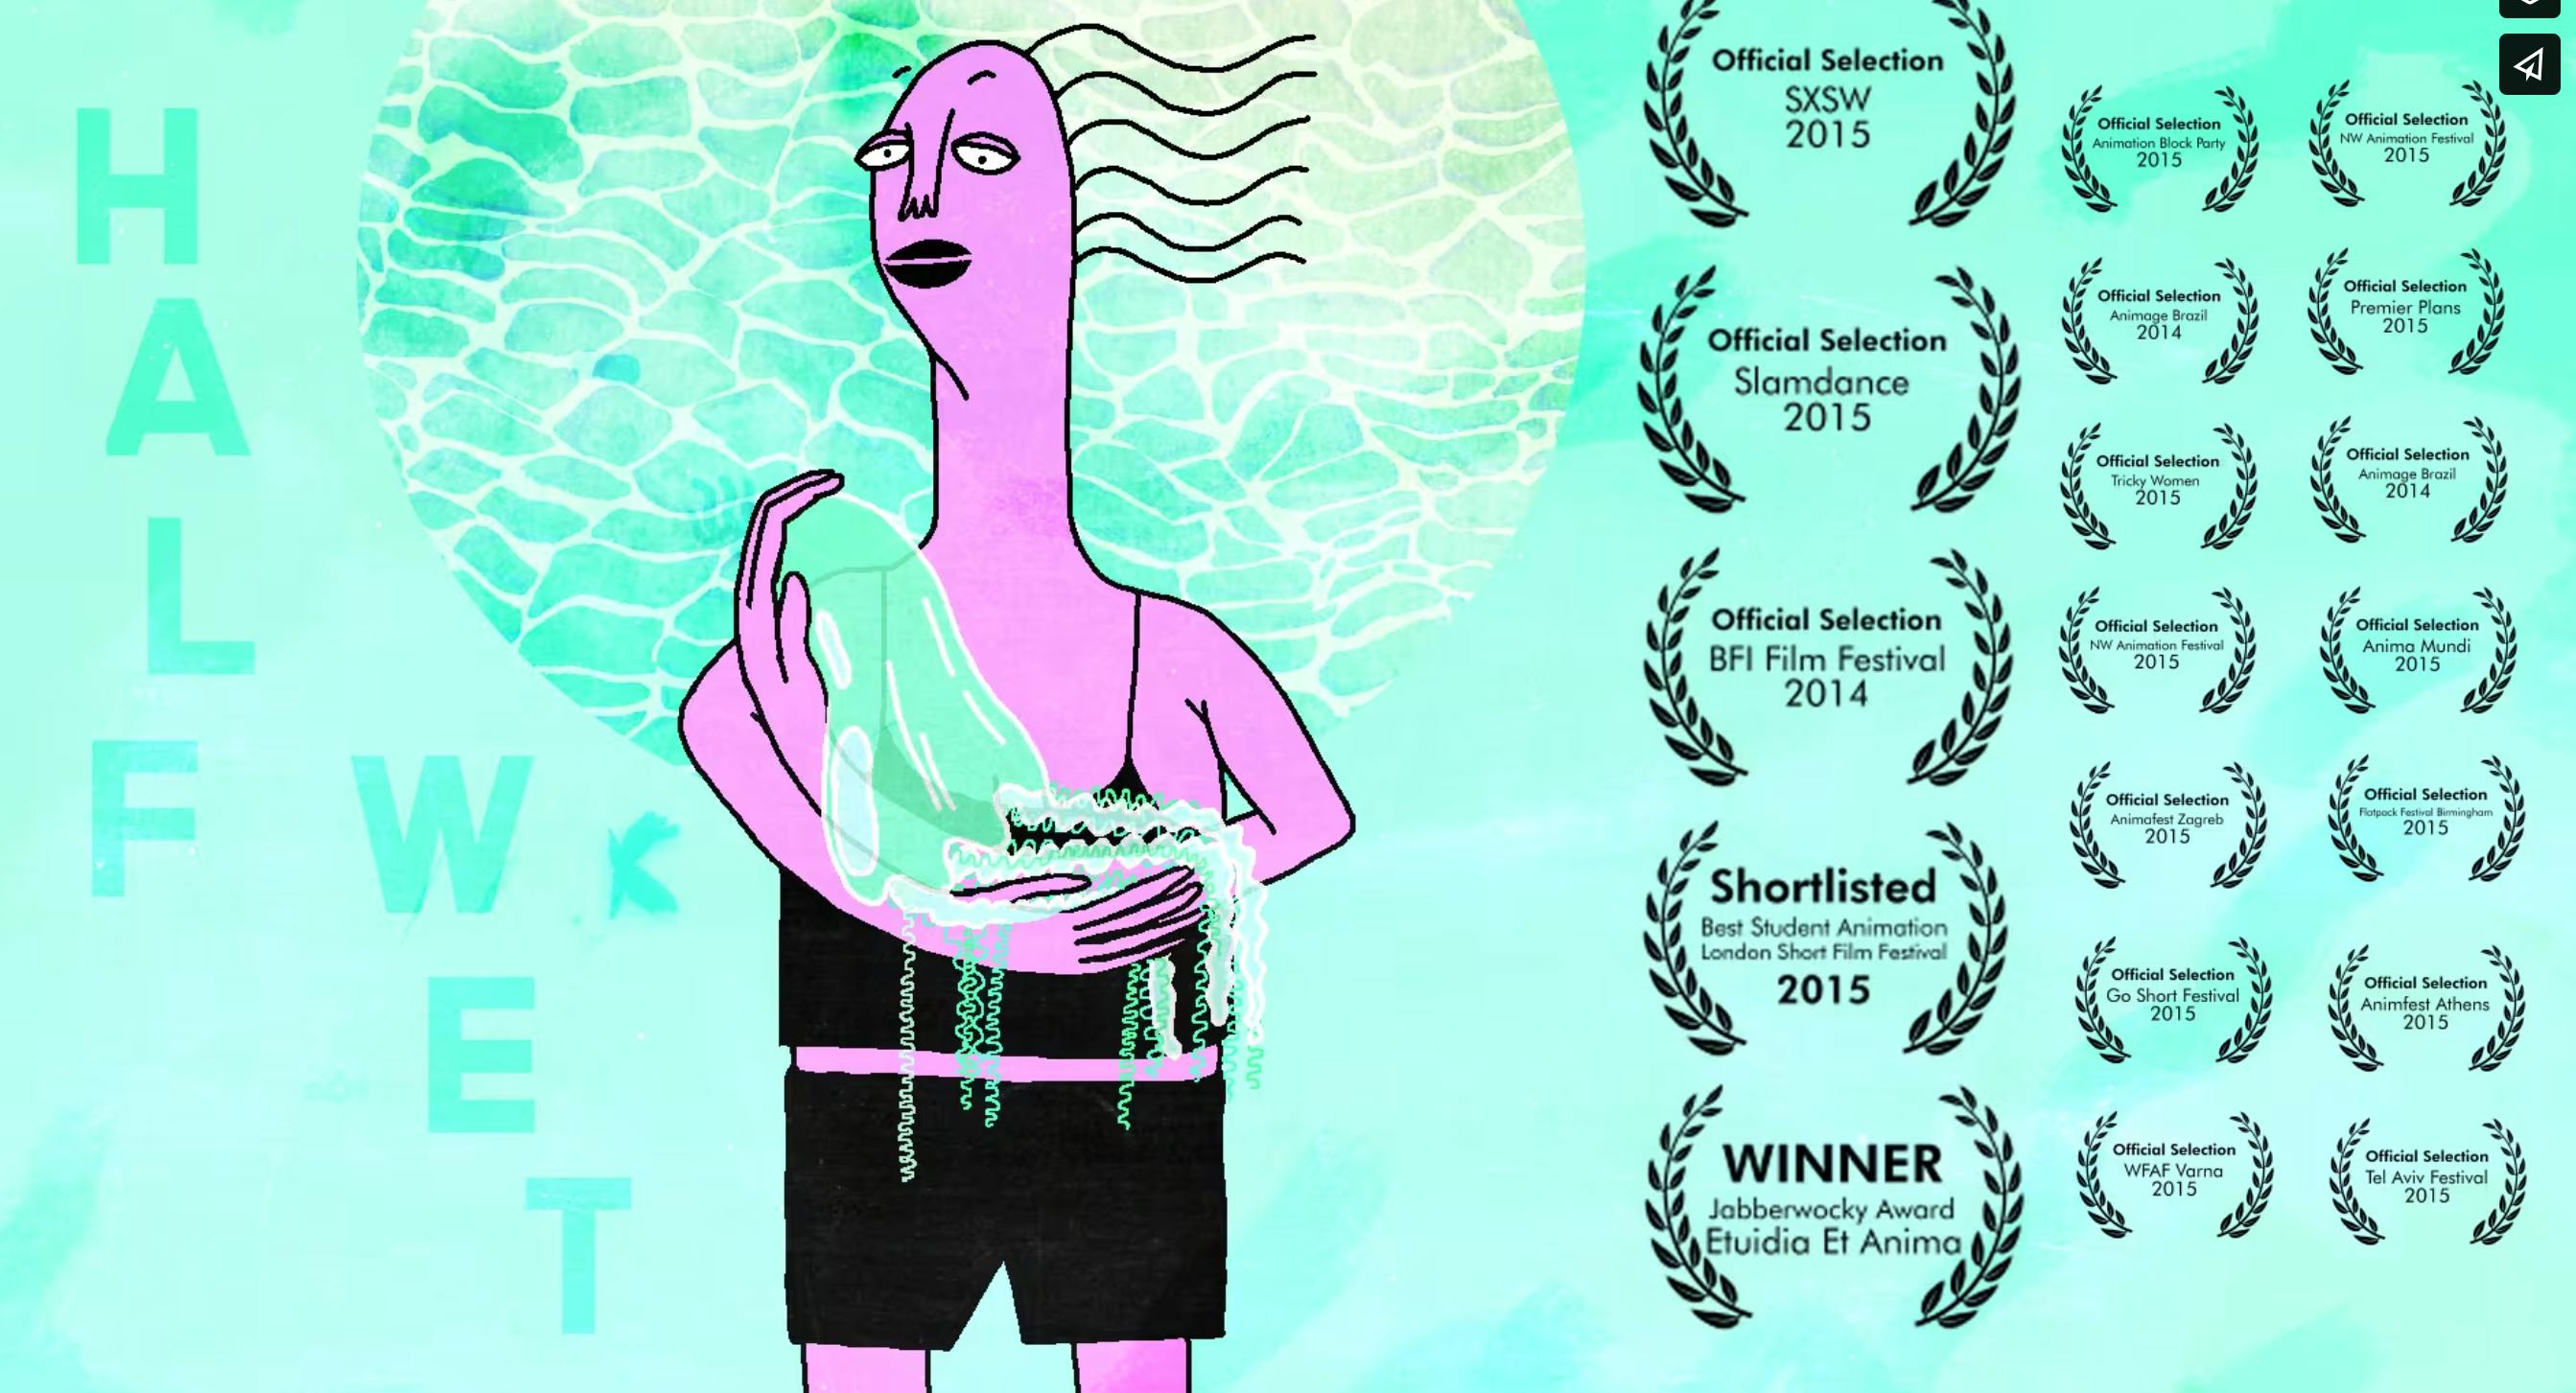 title card for Sophie Koko Gate's Half Wet (2014). A bright turquoise background, a feminine figure with pink skin and wavy hair is illustrated holding a jellyfish in the manner of a baby. She's wearing a simple black two piece bathing suit. 
The words "Half Wet" are offset in the background in a slightly darker turquoise. The right side of the image shows all of the awards the film has won: 
Official Selection SXSW - 2015
Official Selection Slamdance - 2015
Official Selection BFI Film Festival - 2014
Shortlisted Best Student Animation London Short Film Festival - 2015
WINNER Jabberwocky Award Etuidia Et Anima
Official Selection animation Block Party - 2015
Official Selection Animage Brazil - 2014
Official Selection Tricky Women - 2015
Official Selection NW animation festival - 2015
Official Selection Animafest Zagreb - 2015
Official Selection Go Short Festival - 2015
Official Selection WFAF Varna - 2015
Official Selection NW Animation Festival - 2015
Official Selection Premier Plans - 2015
Official Selection Animage Brazil - 2014
Official Selection Anima Mundi - 2015
Official Selection Flapack festival Burningham - 2015
Official Seletion Animfest Athens - 2015
Official Selection Tel Aviv Festival - 2015